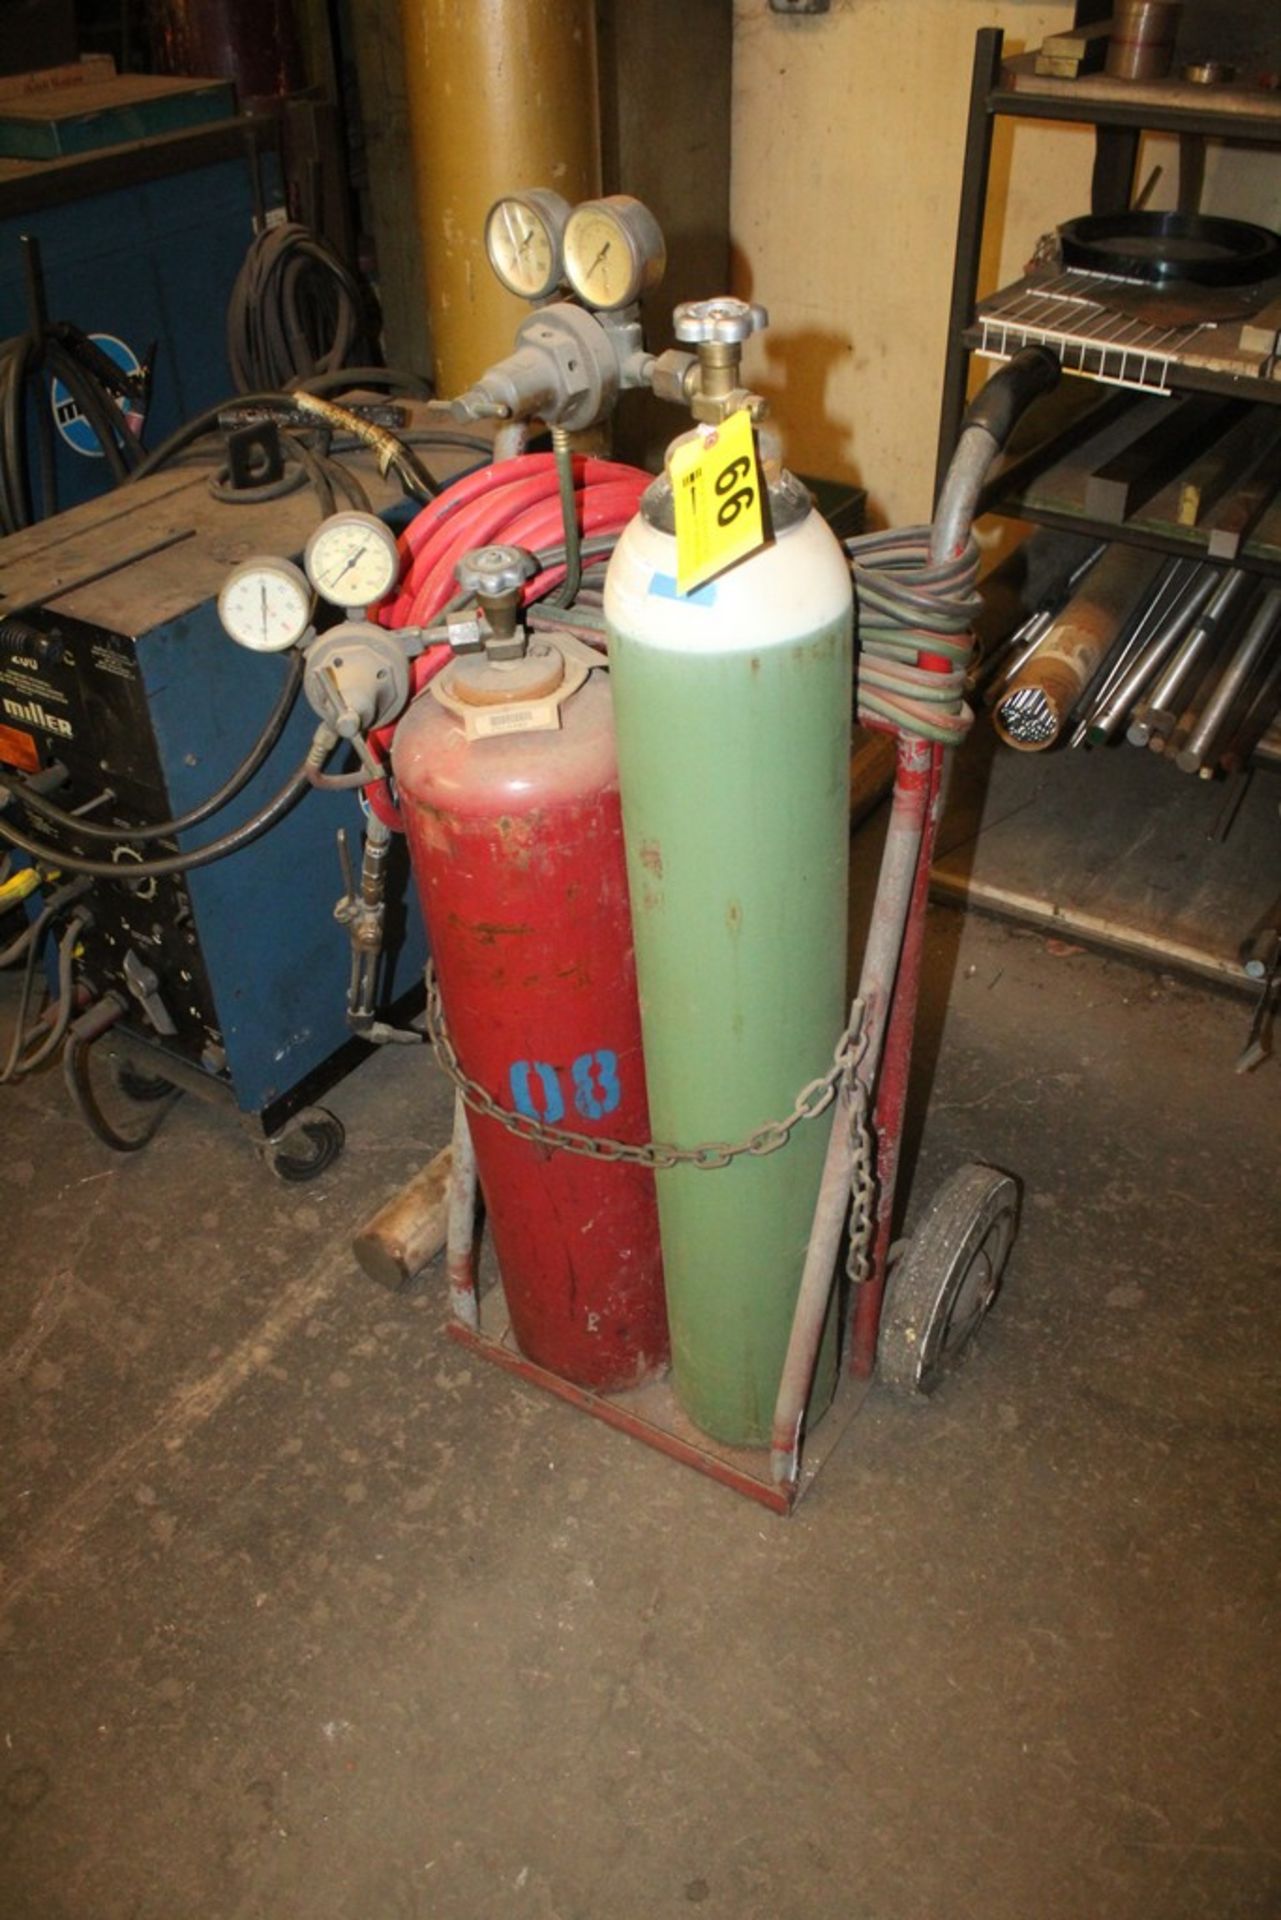 PORTABLE WELDING CART WITH TANKS, GAUGES, HOSES & TORCH - Image 2 of 2